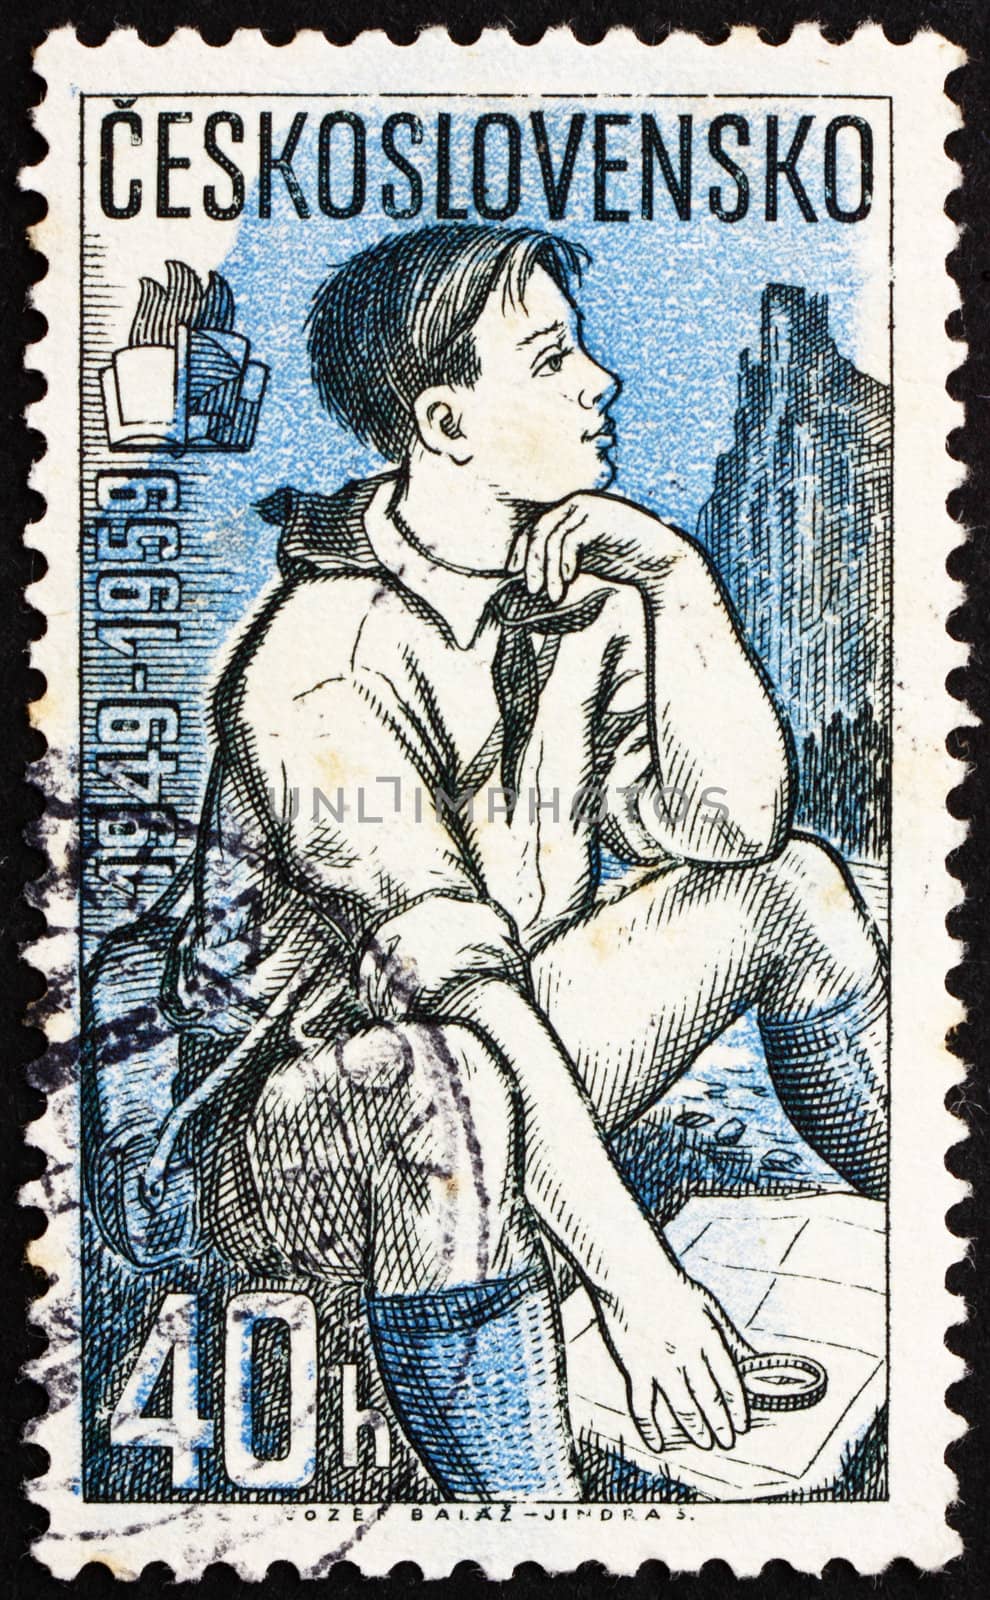 CZECHOSLOVAKIA - CIRCA 1959: a stamp printed in the Czechoslovakia shows Pioneer Studying Map, circa 1959